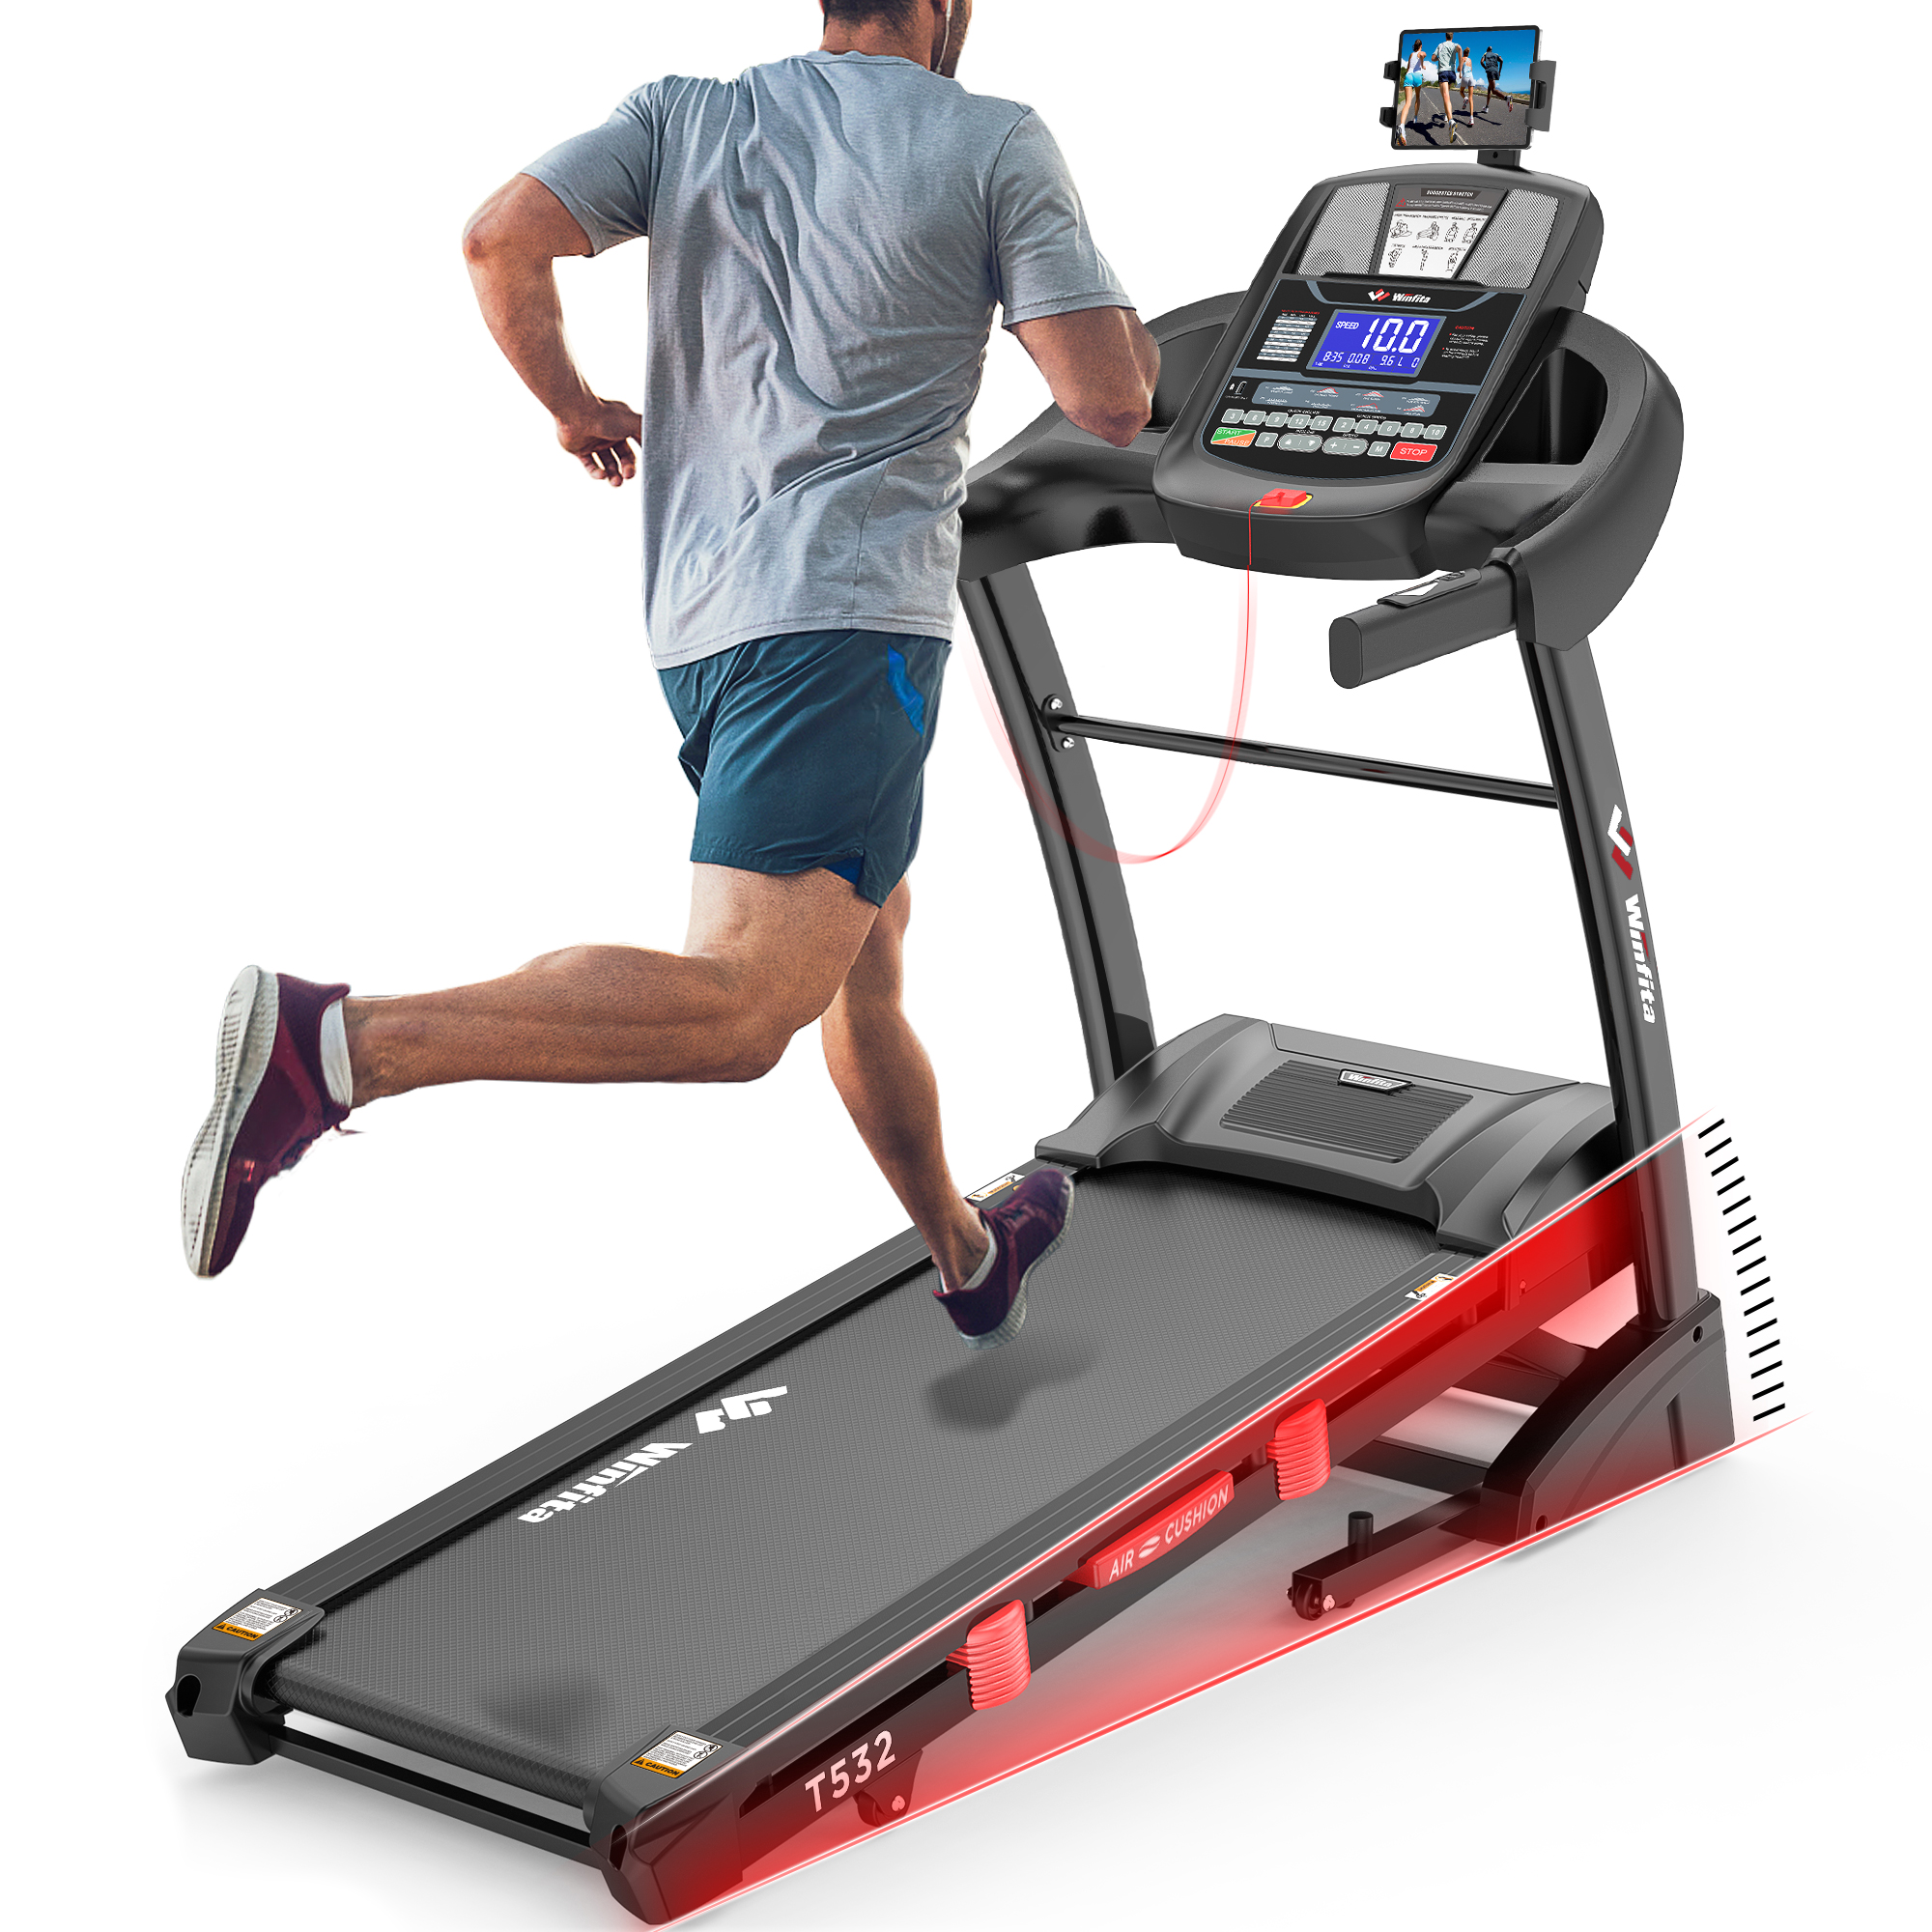 Foldable treadmill is a convenient and versatile piece of exercise equipment that allows you to enjoy the benefits of walking,